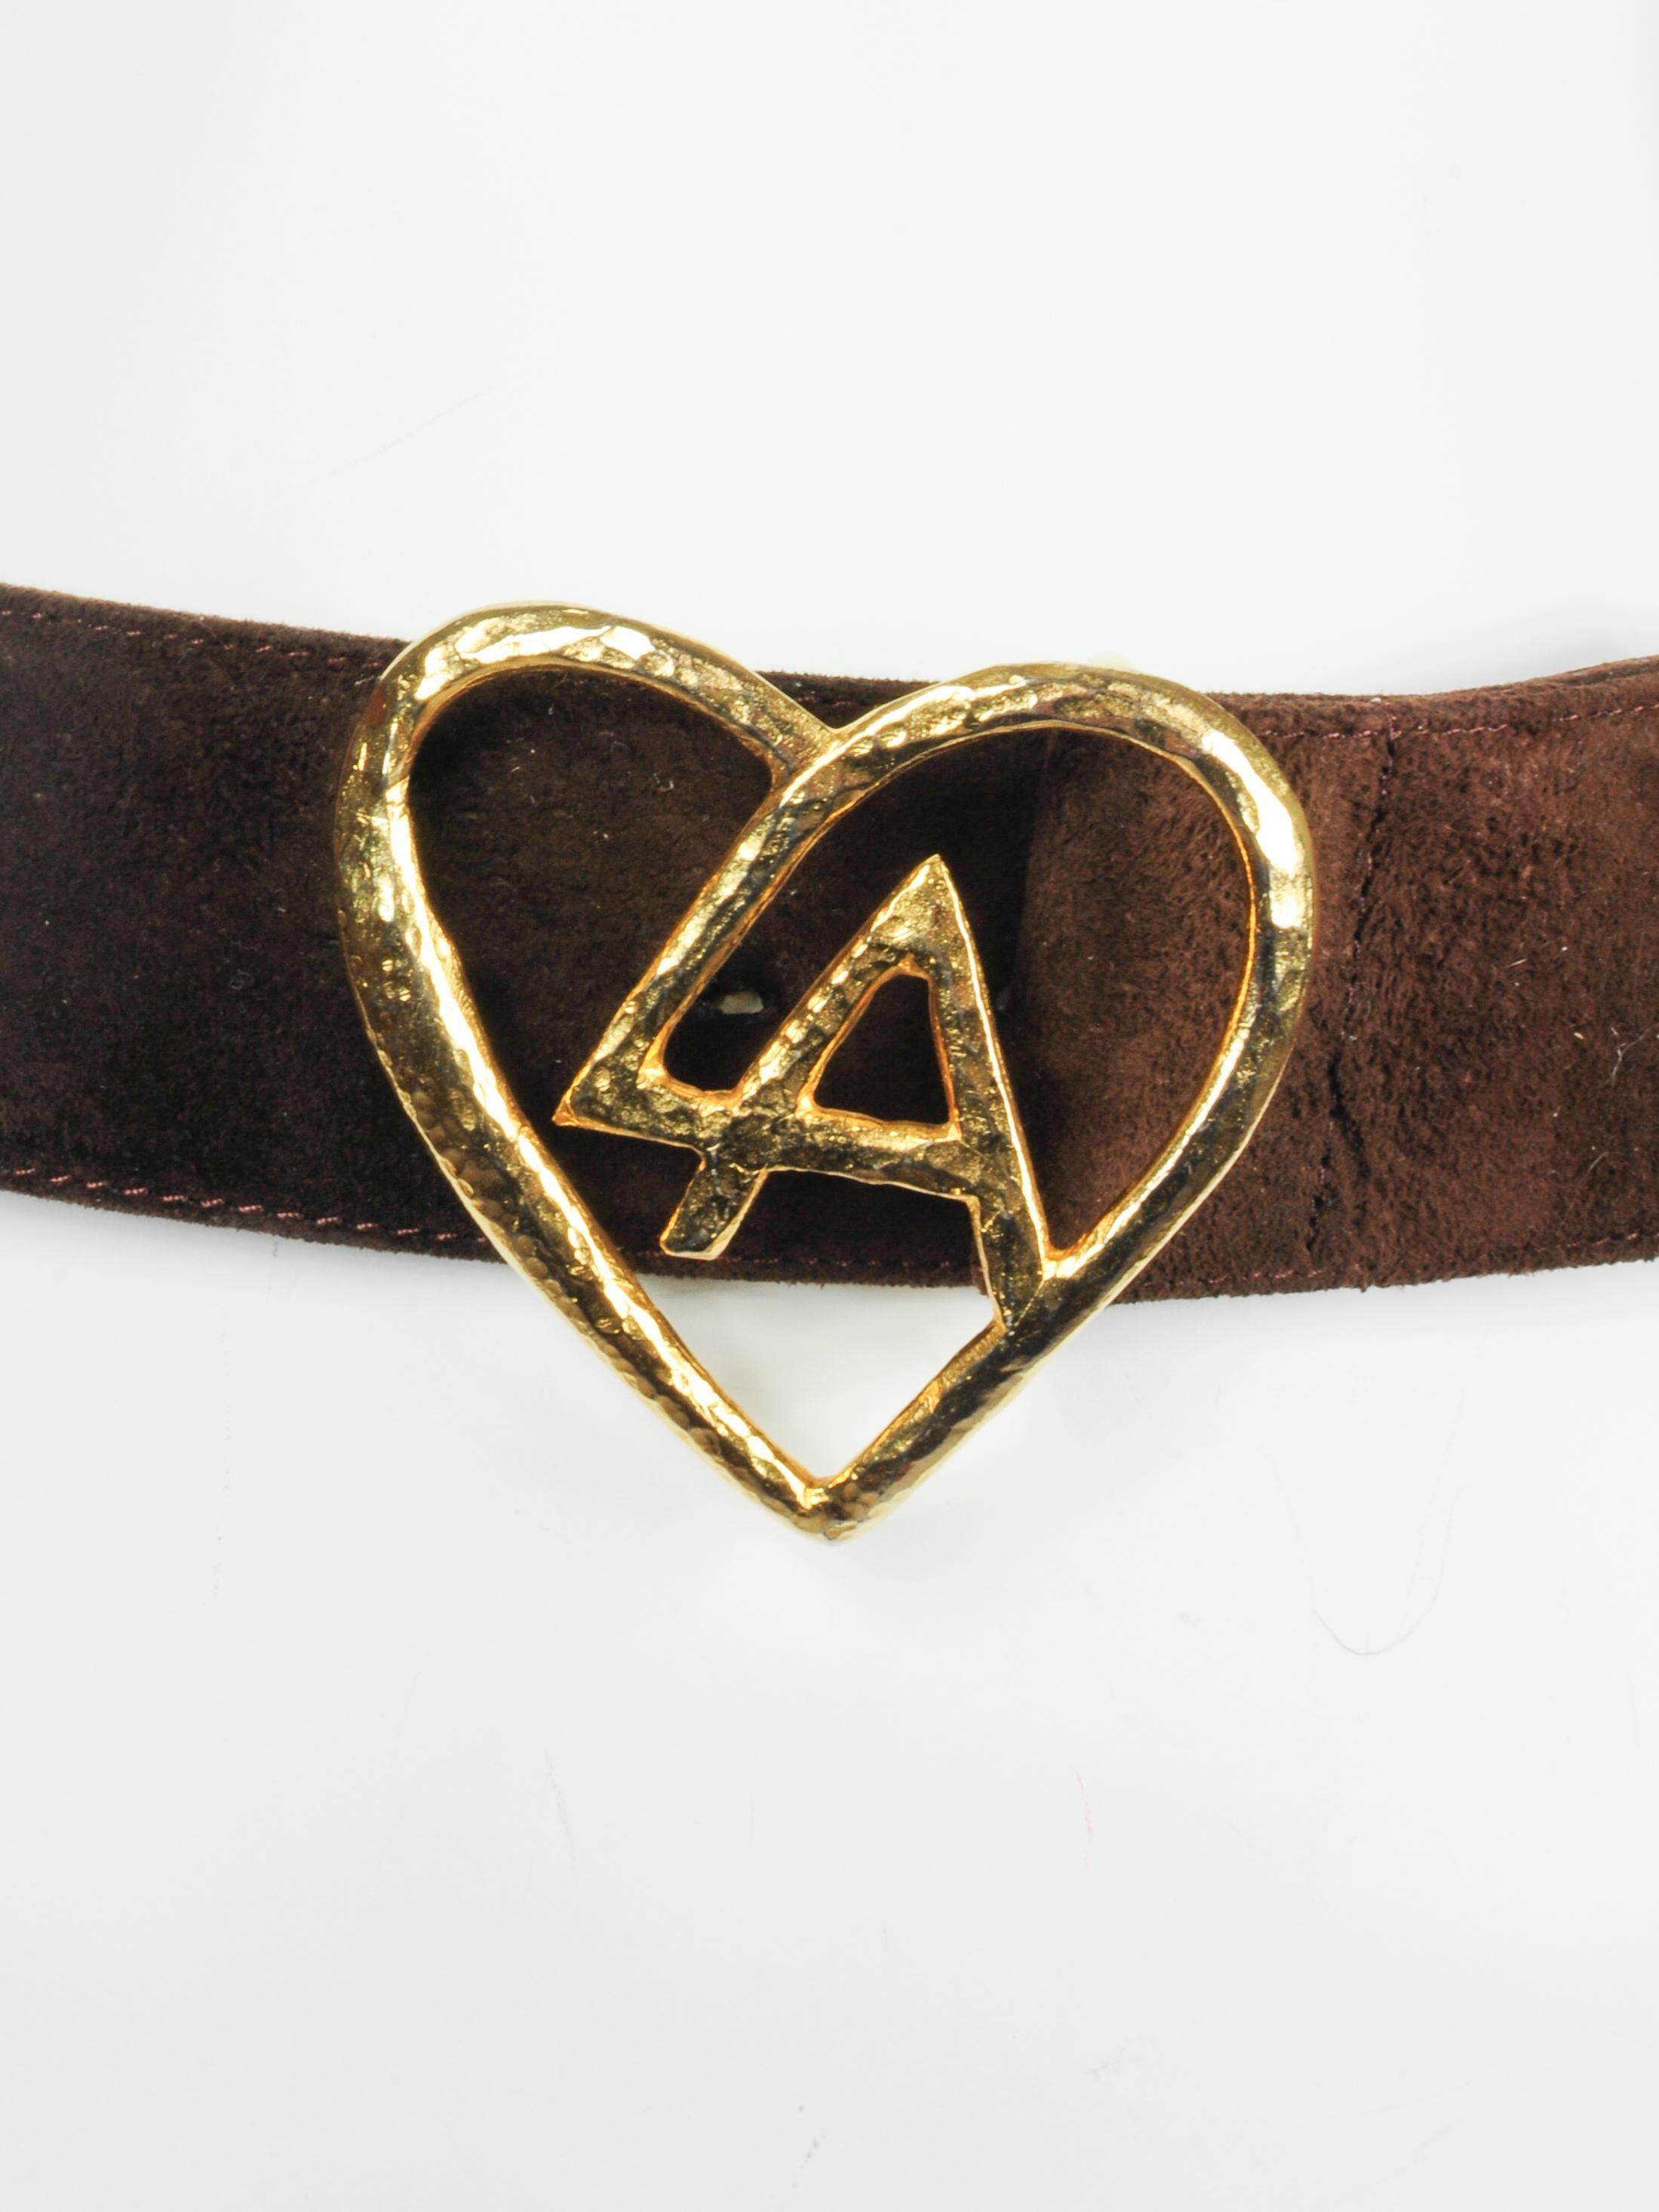 Vintage brown suede Loris Azzaro LA gold heart logo waistbelt from the 1970s. The hammered golden heart with Loris Azzaro’s initials L.A. designed into it. Loris Azzaro is known for this glamourous designs and this definitely fits into that design